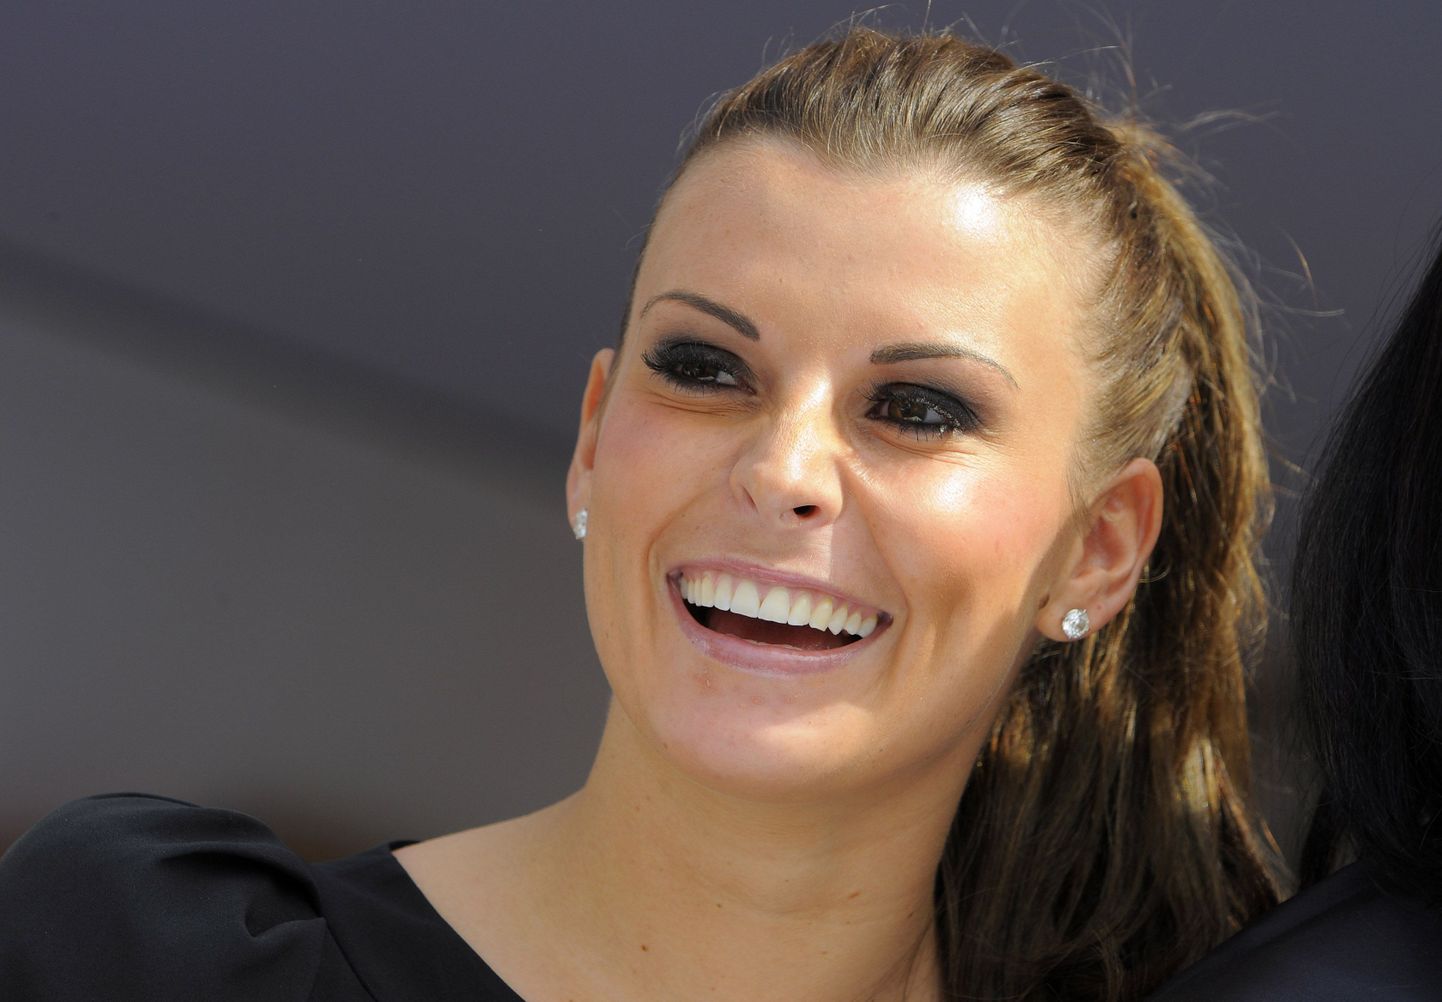 Coleen Rooney, wife of Manchester United's Wayne Rooney, watches during the second day of The Grand National Meeting at Aintree Racecourse in Liverpool April 9, 2010. REUTERS/Nigel Roddis (BRITAIN - Tags: SPORT HORSE RACING SOCCER FASHION)